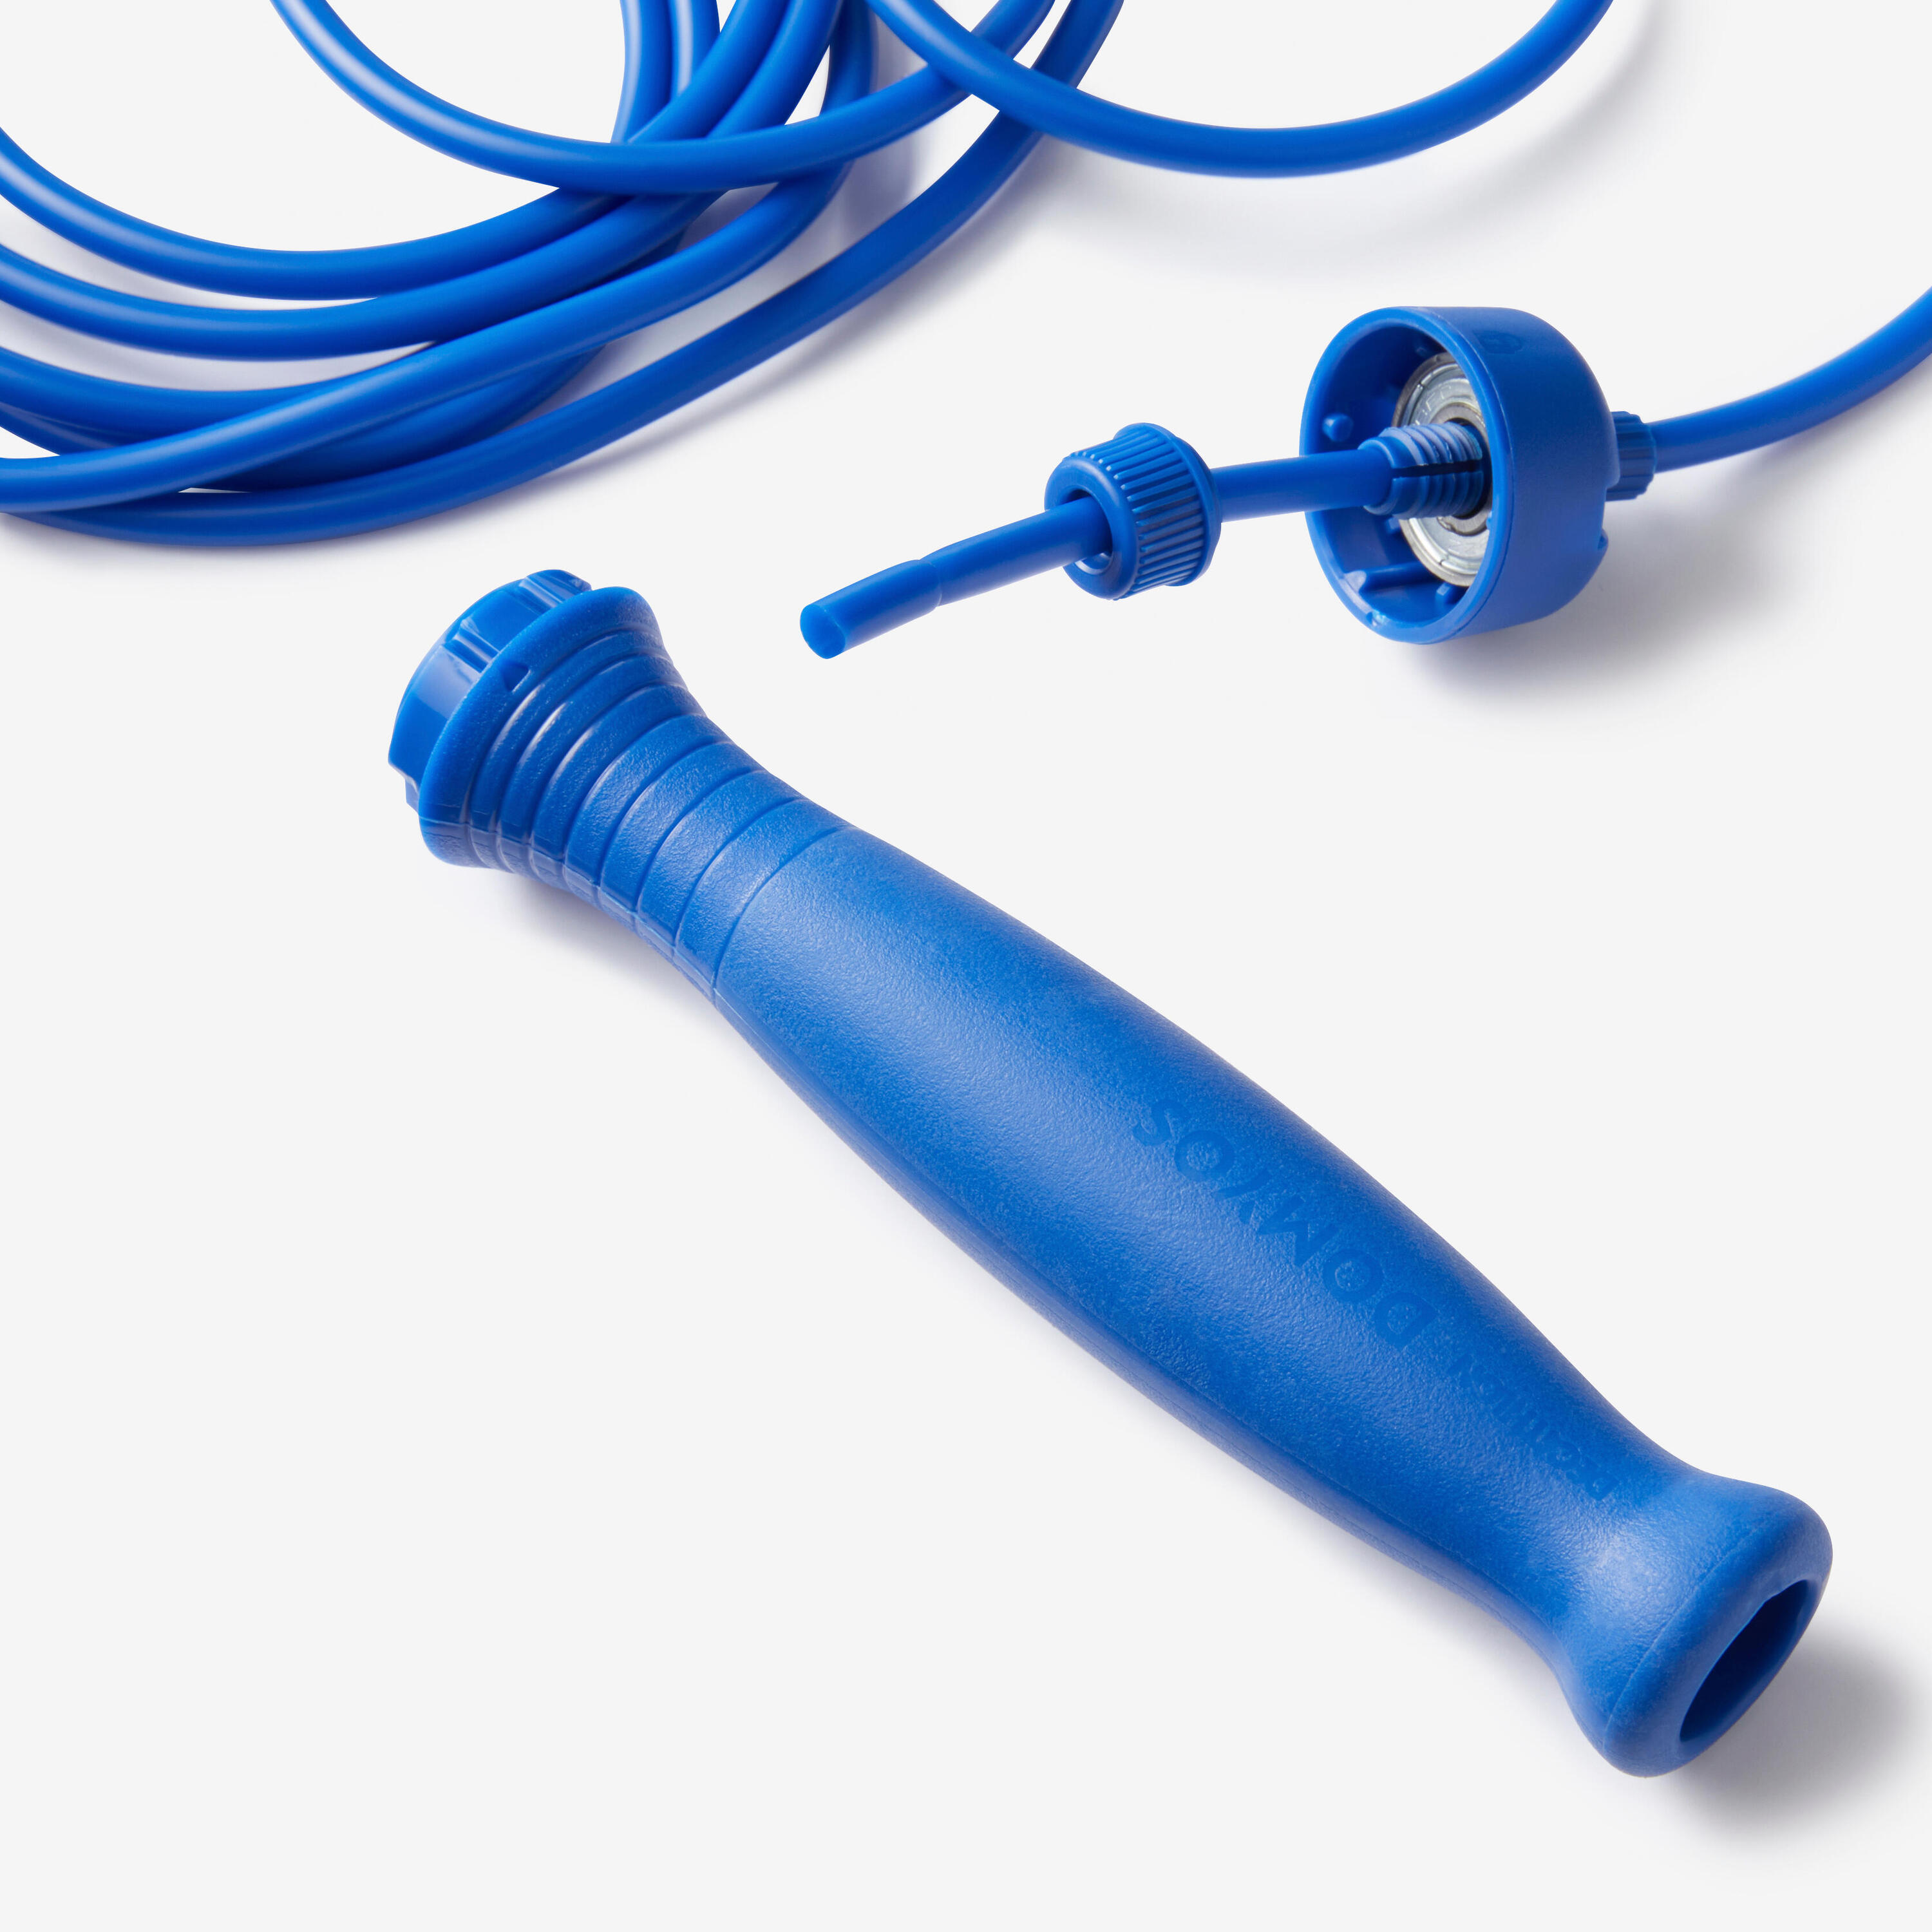 Jump Rope with Rubber Handles 3 m Adjustable Length - Vivid Blue 4/7